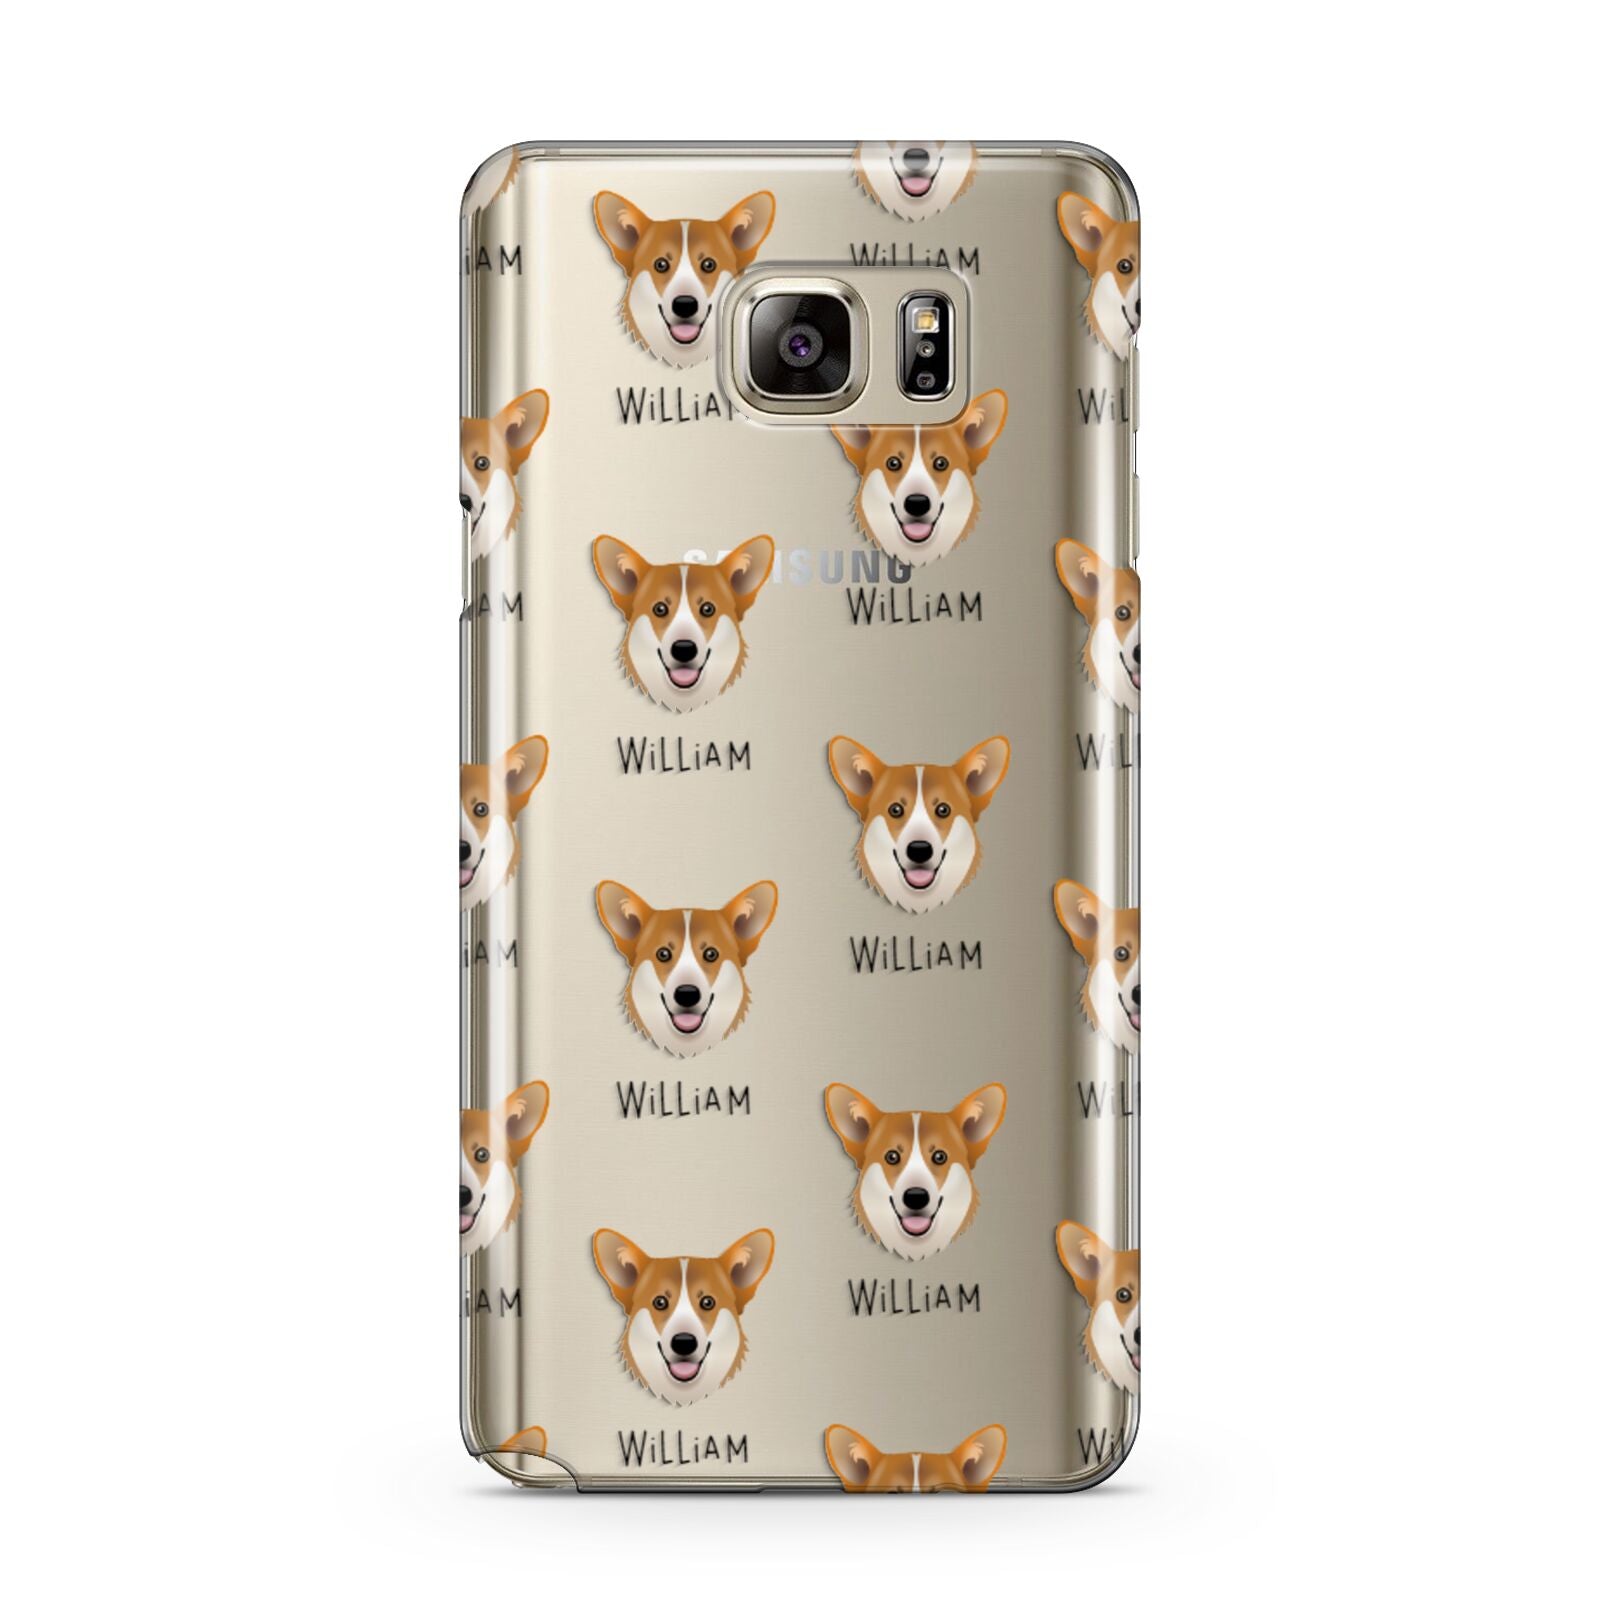 Pembroke Welsh Corgi Icon with Name Samsung Galaxy Note 5 Case